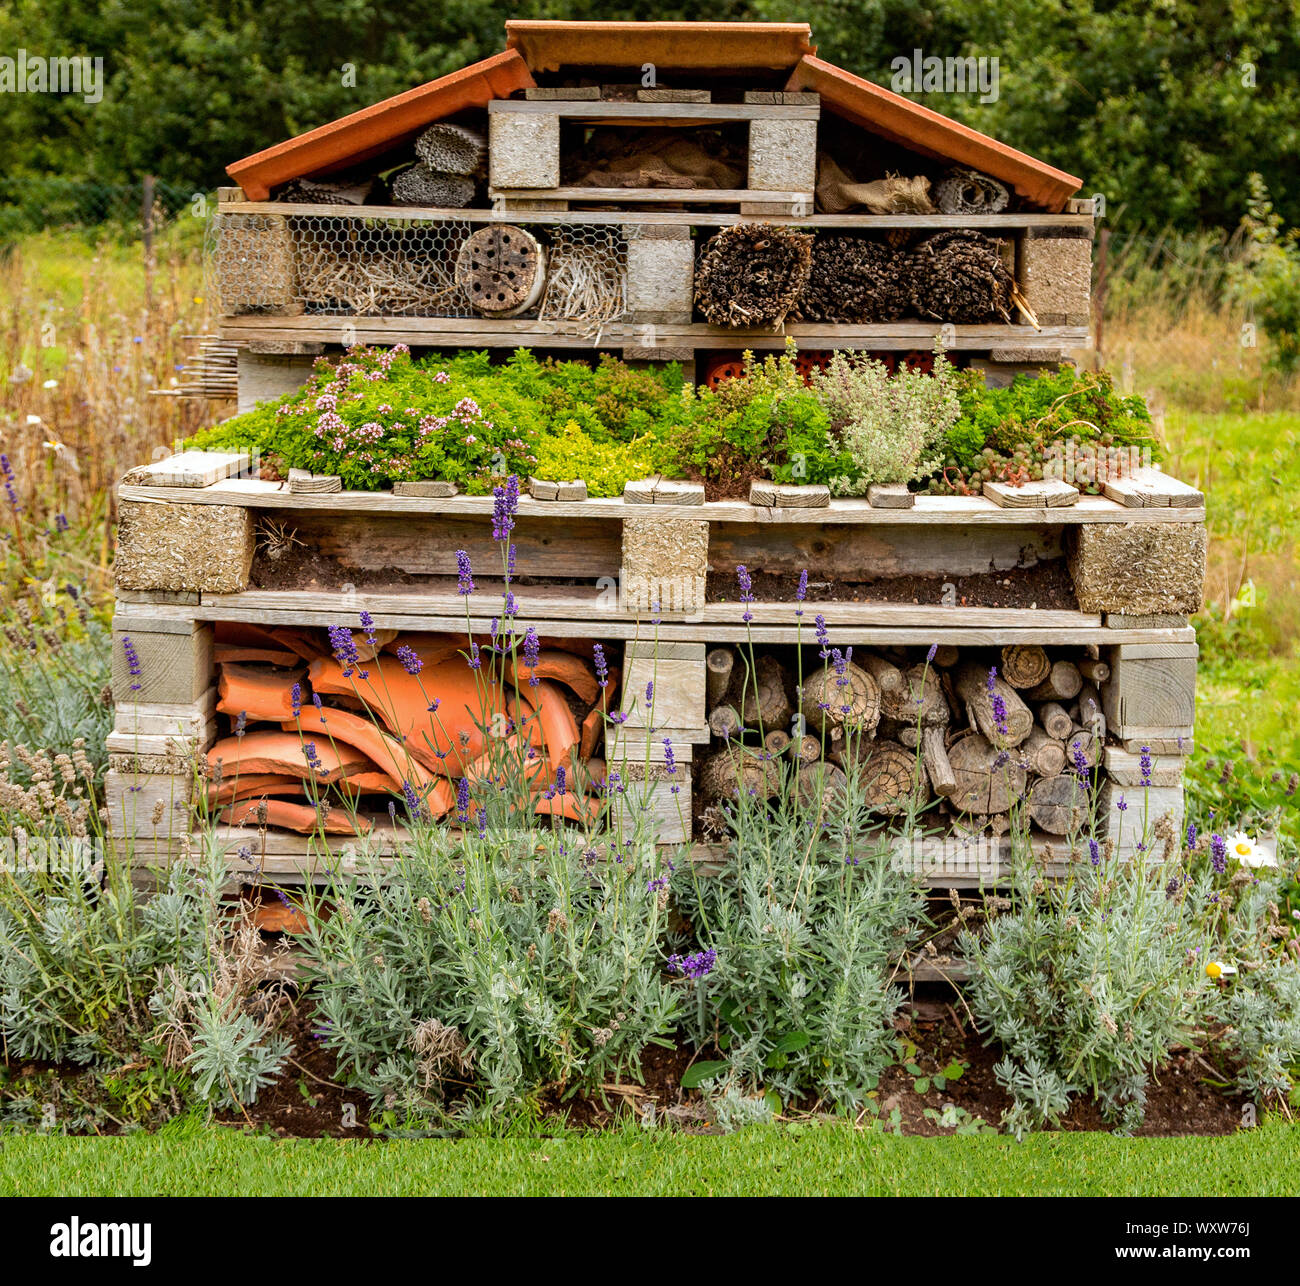 Bug Hotel made from old pallets, and recycled items at Aylett Nurseries, St Albans, Hertfordshire, England, United Kingdom. Stock Photo